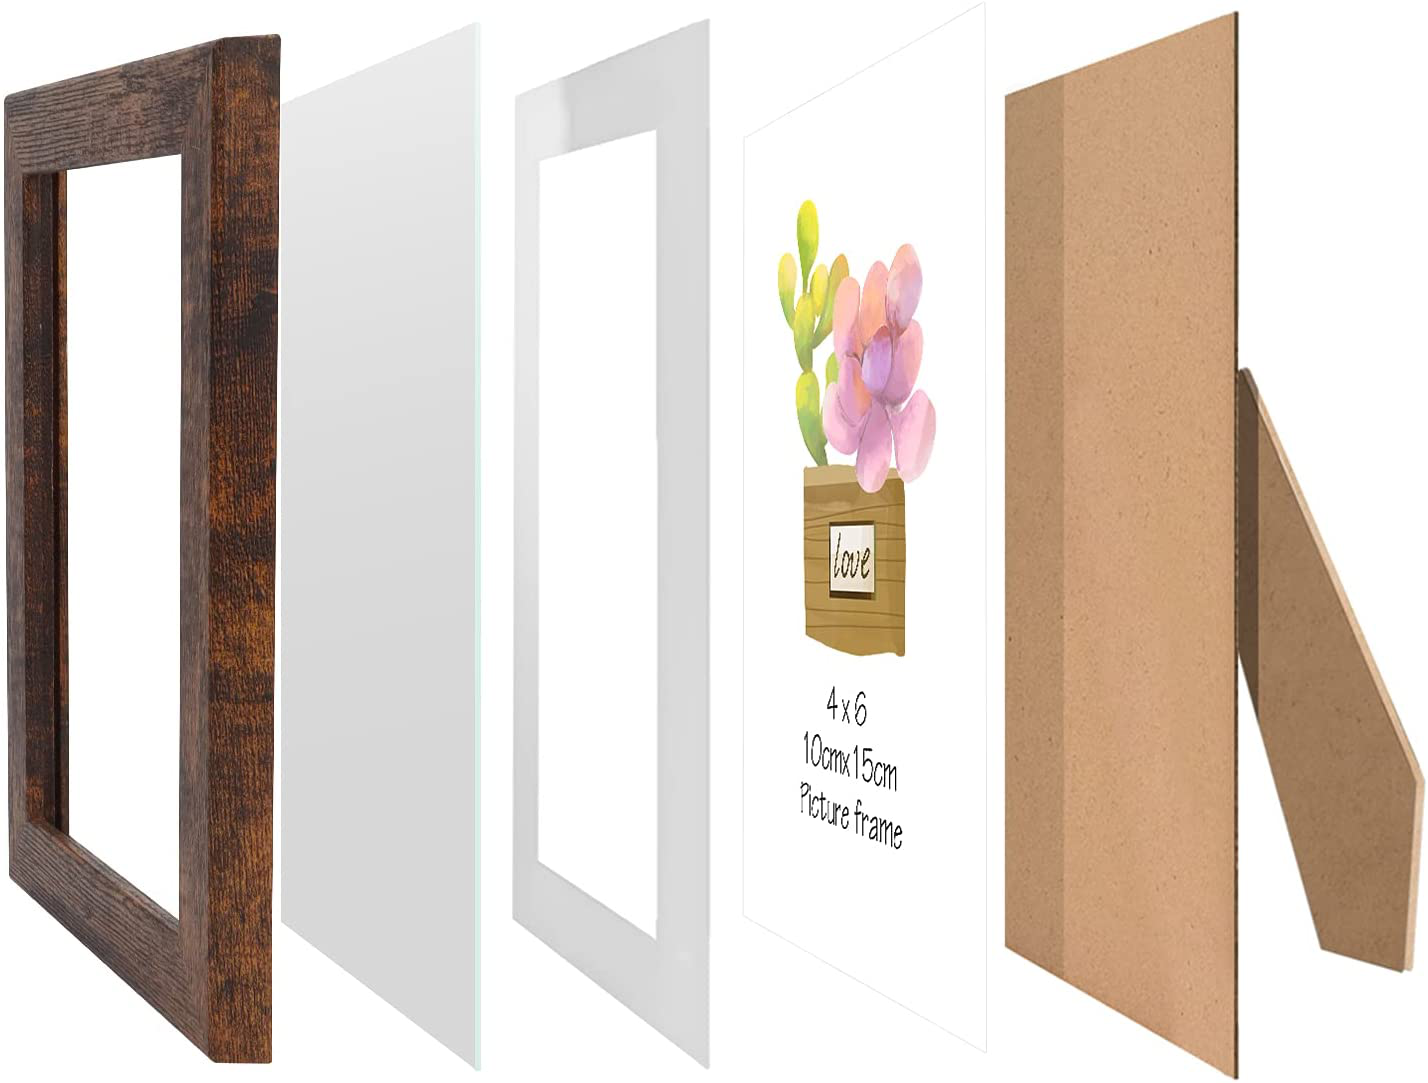 SPEPLA 8x10 picture frames set of 4, Wooden Rustic Picture Frame for Wall or Tabletop, Brown